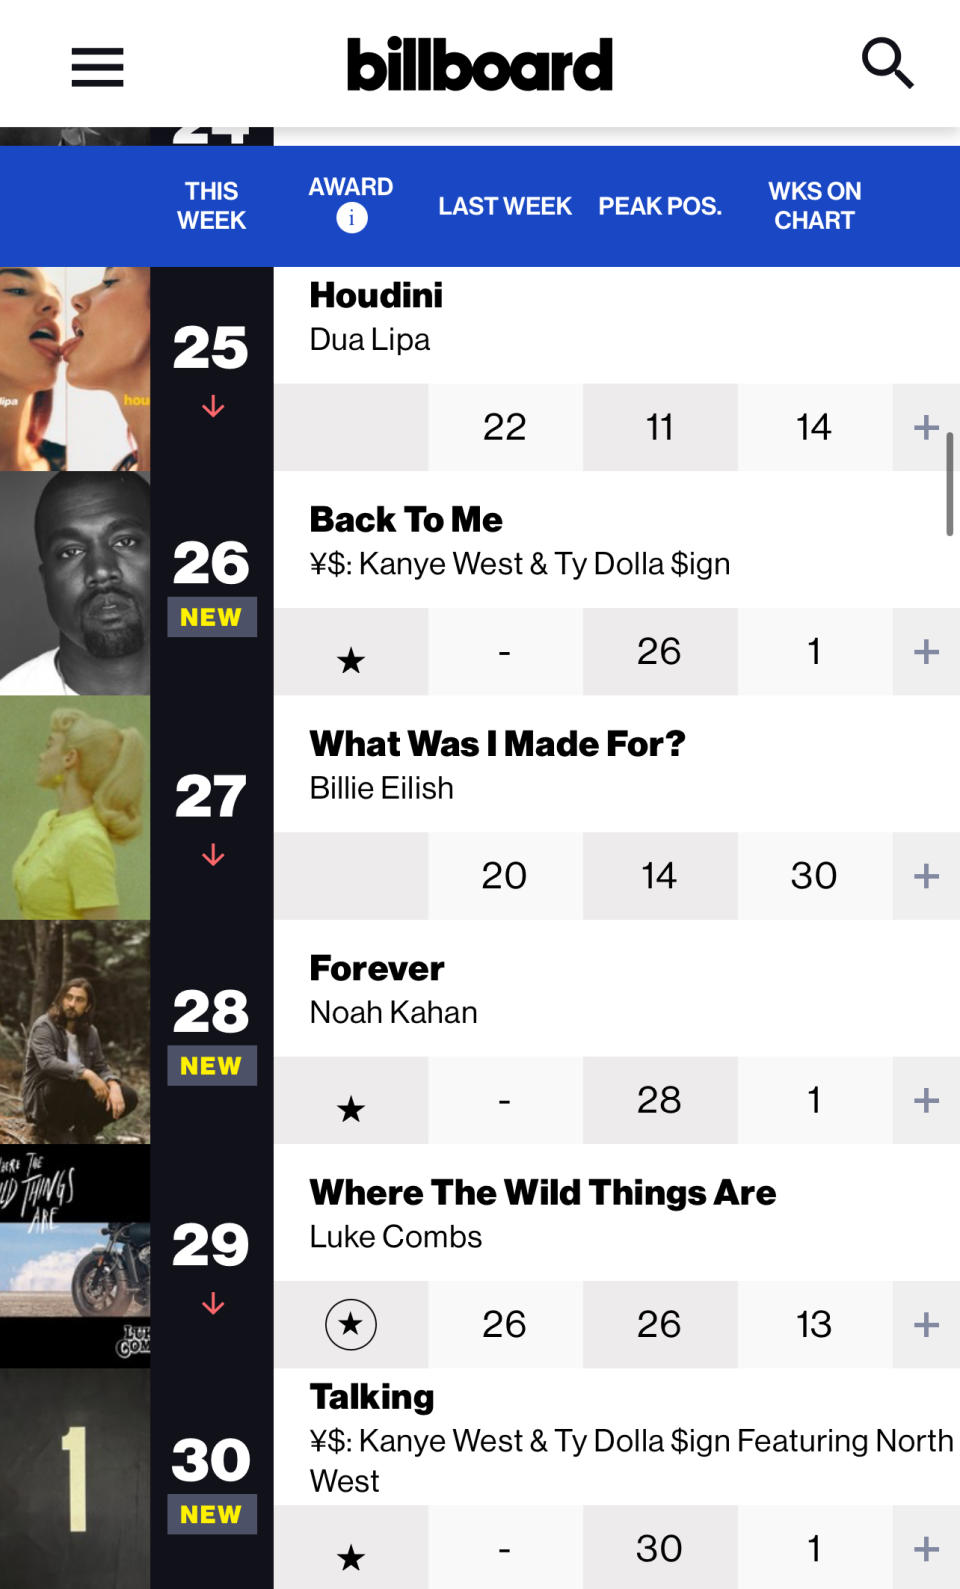 Chart showing song rankings with artist names like Dua Lipa, Kanye West & Dolly Parton, and Billie Eilish with track titles